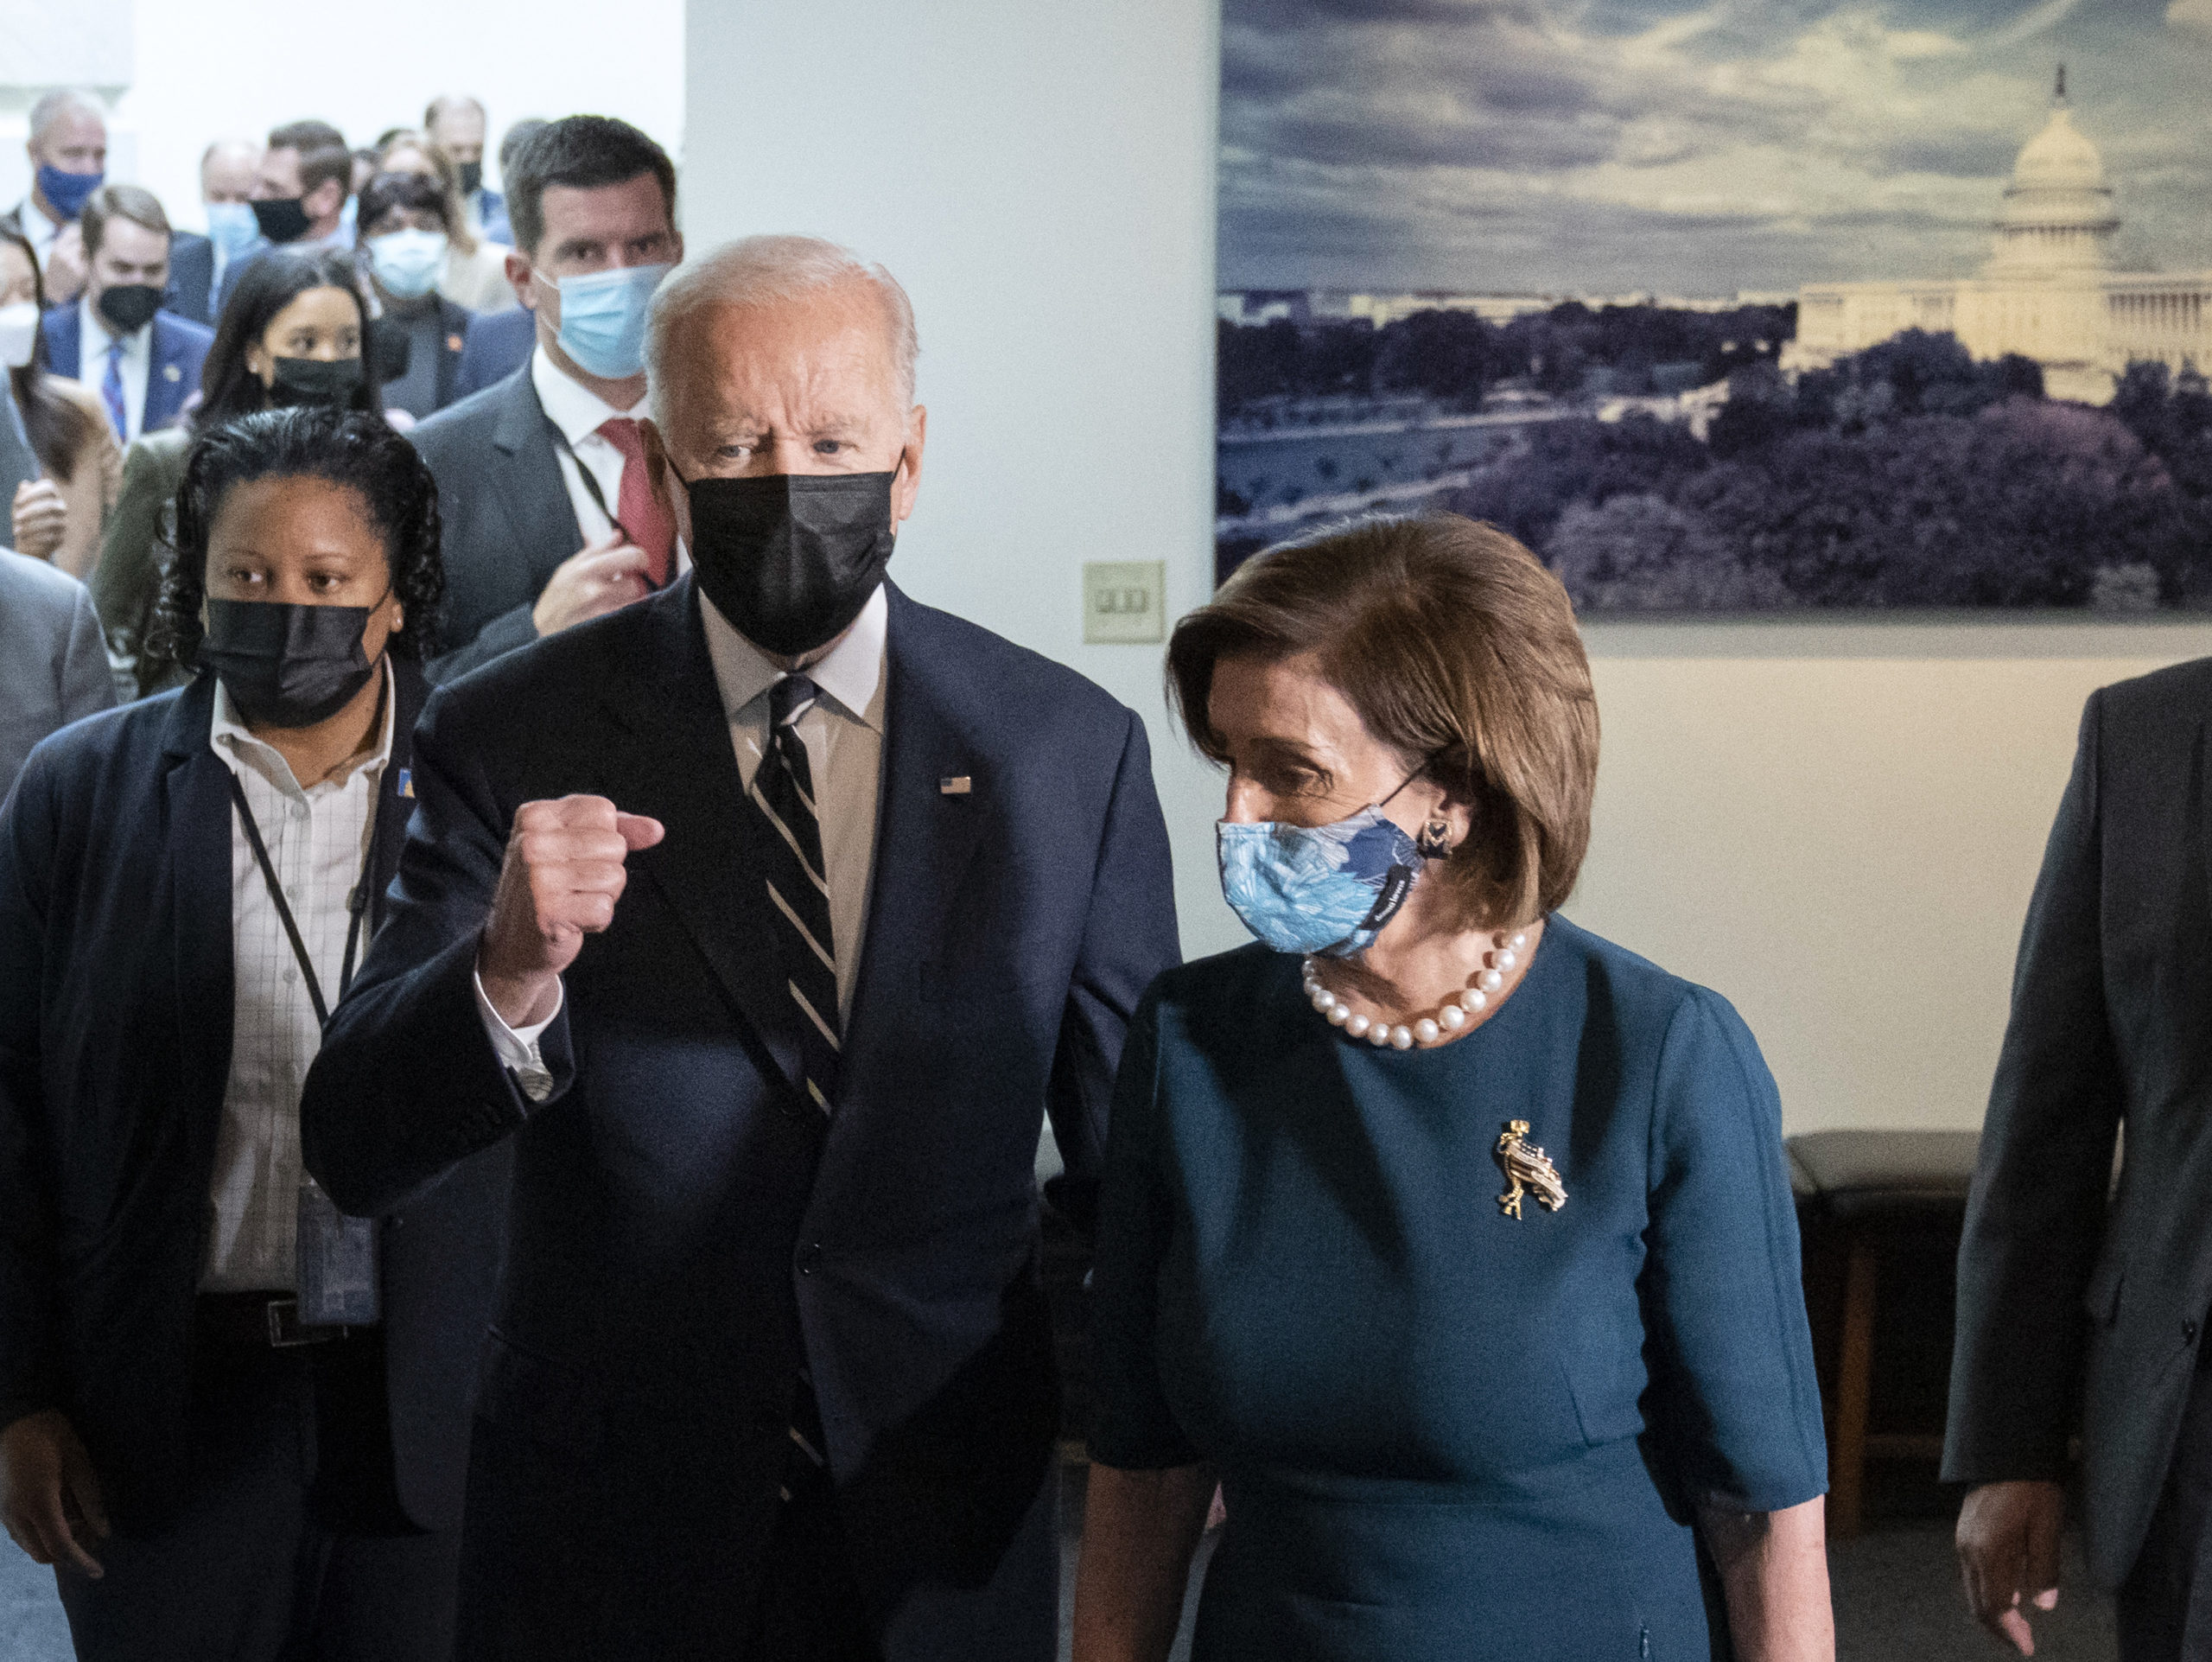 President Joe Biden and House Speaker Nancy Pelosi leave a meeting with House Democrats at the Capitol Thursday. (Drew Angerer/Getty Images)